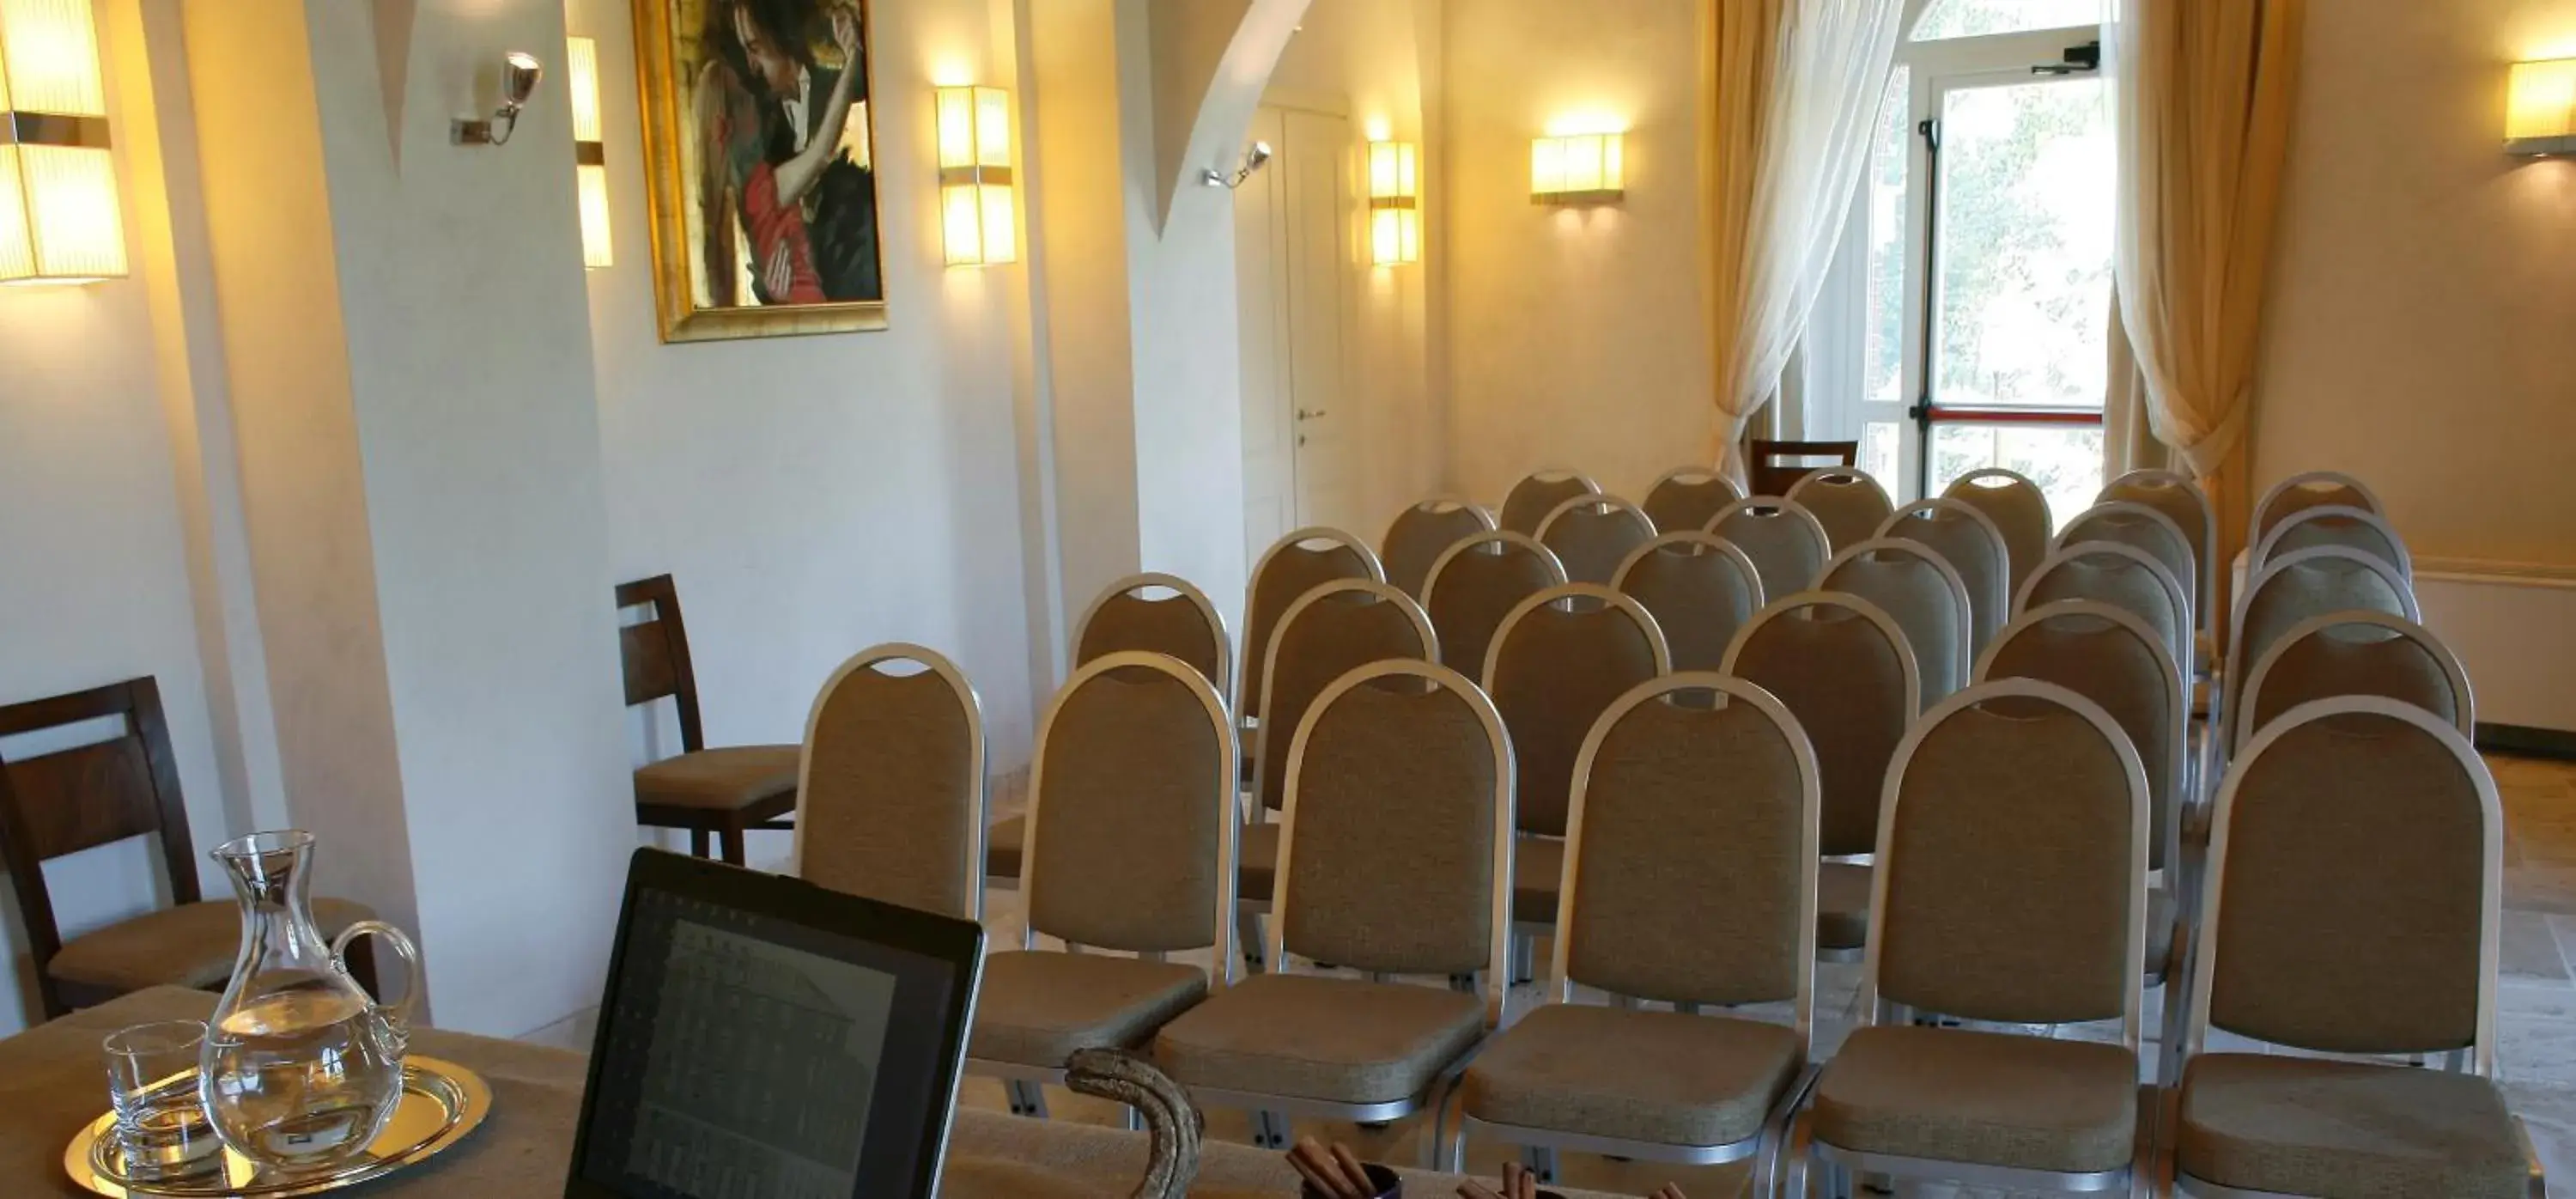 Meeting/conference room in LHP Hotel Certaldo